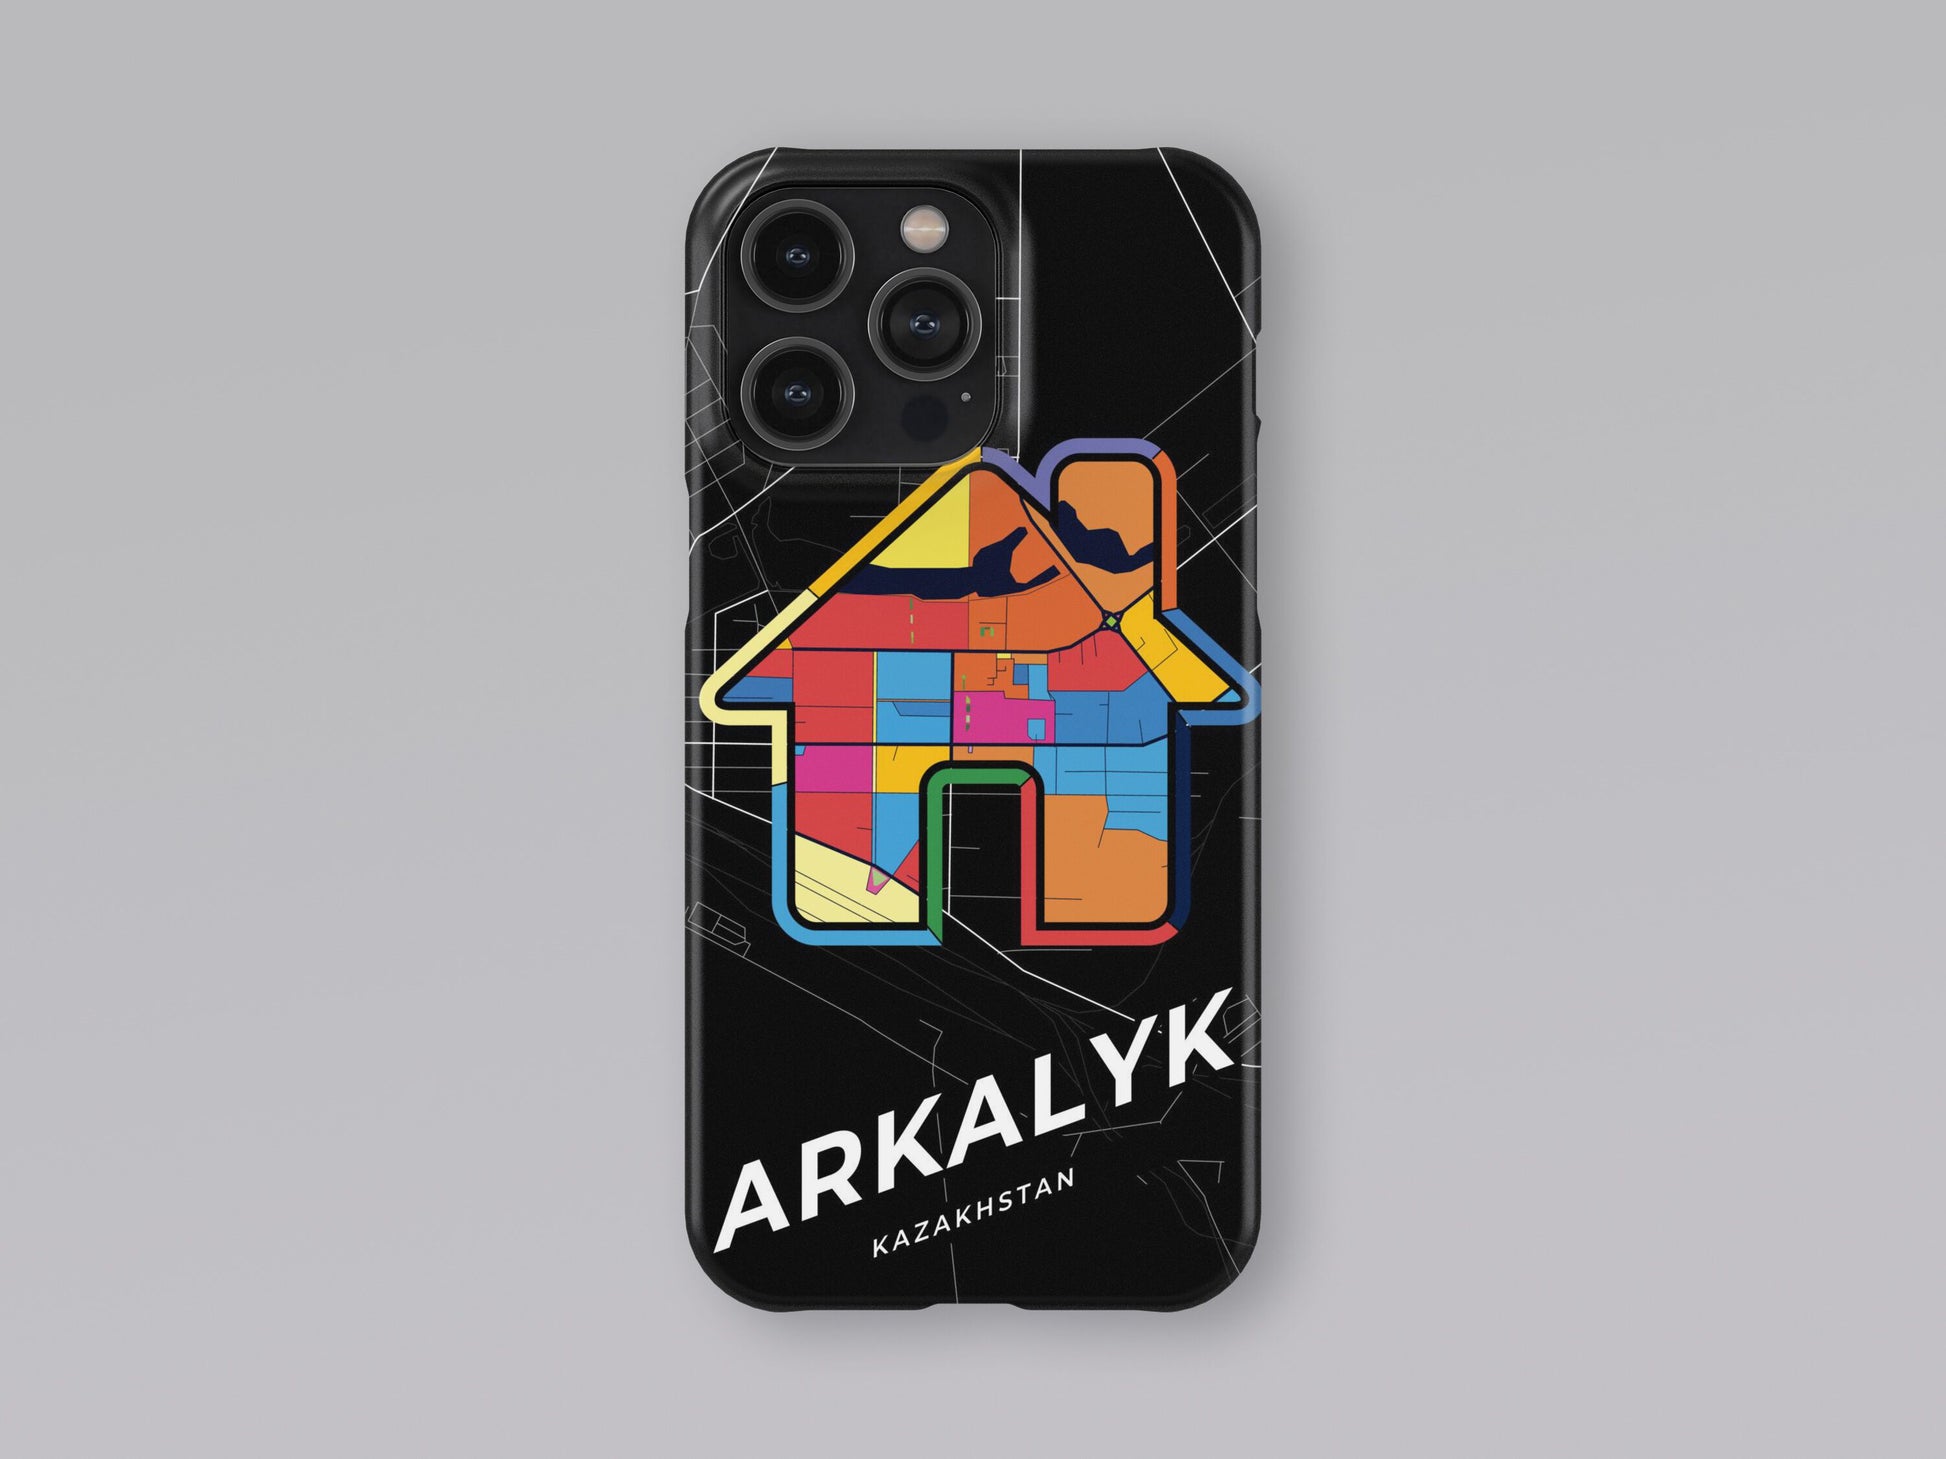 Arkalyk Kazakhstan slim phone case with colorful icon. Birthday, wedding or housewarming gift. Couple match cases. 3